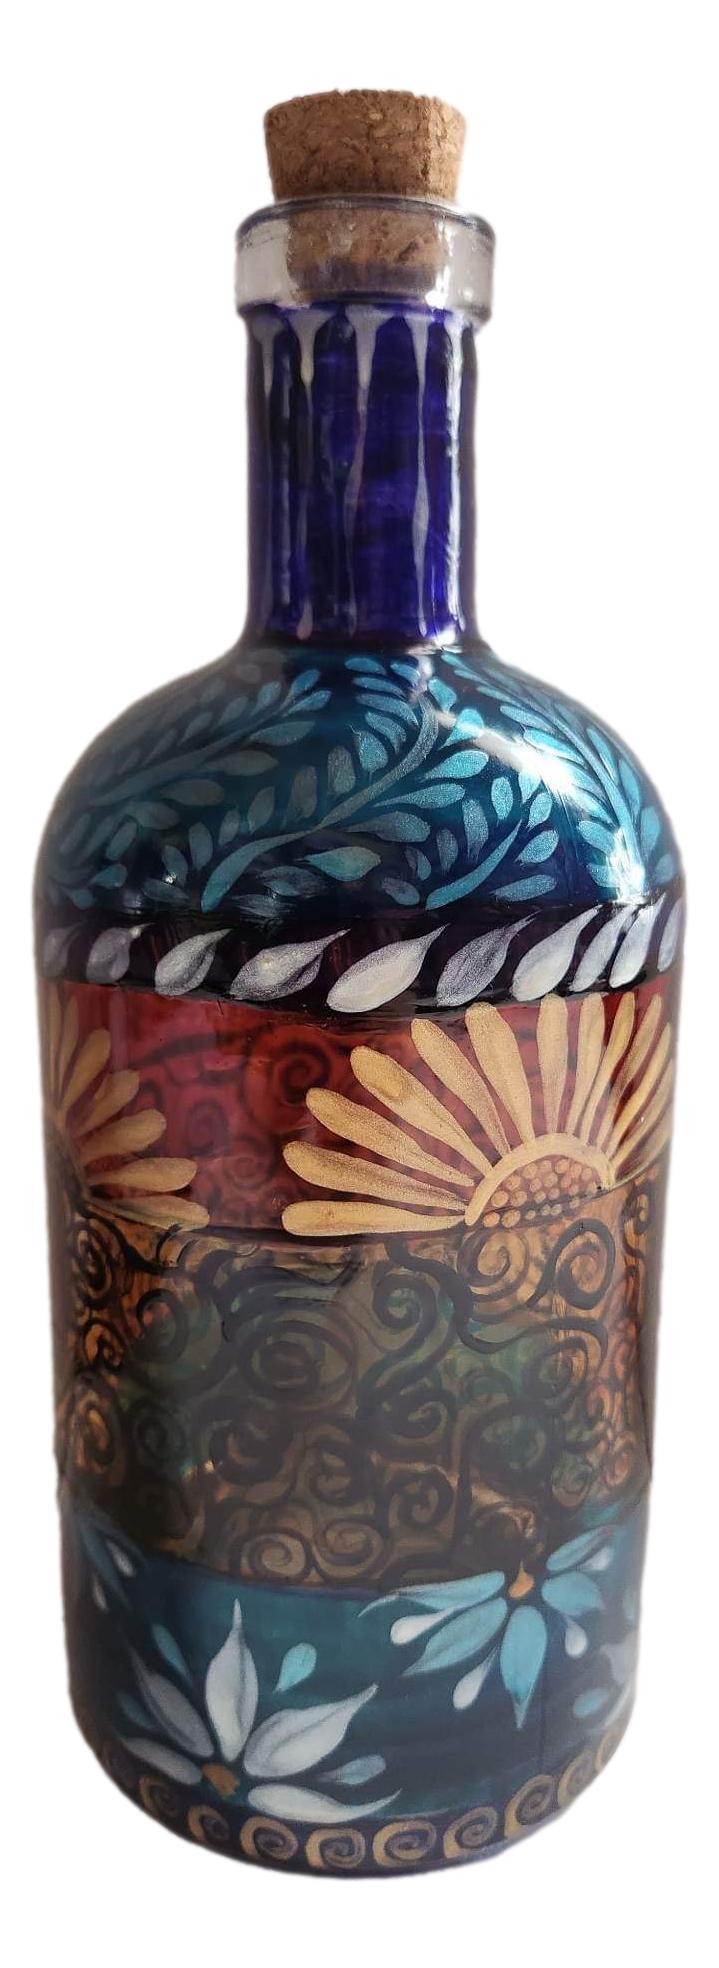 Decorative Glass Large Bottle With Cork Handpainted H: 9 in. x W: 3.5 in.